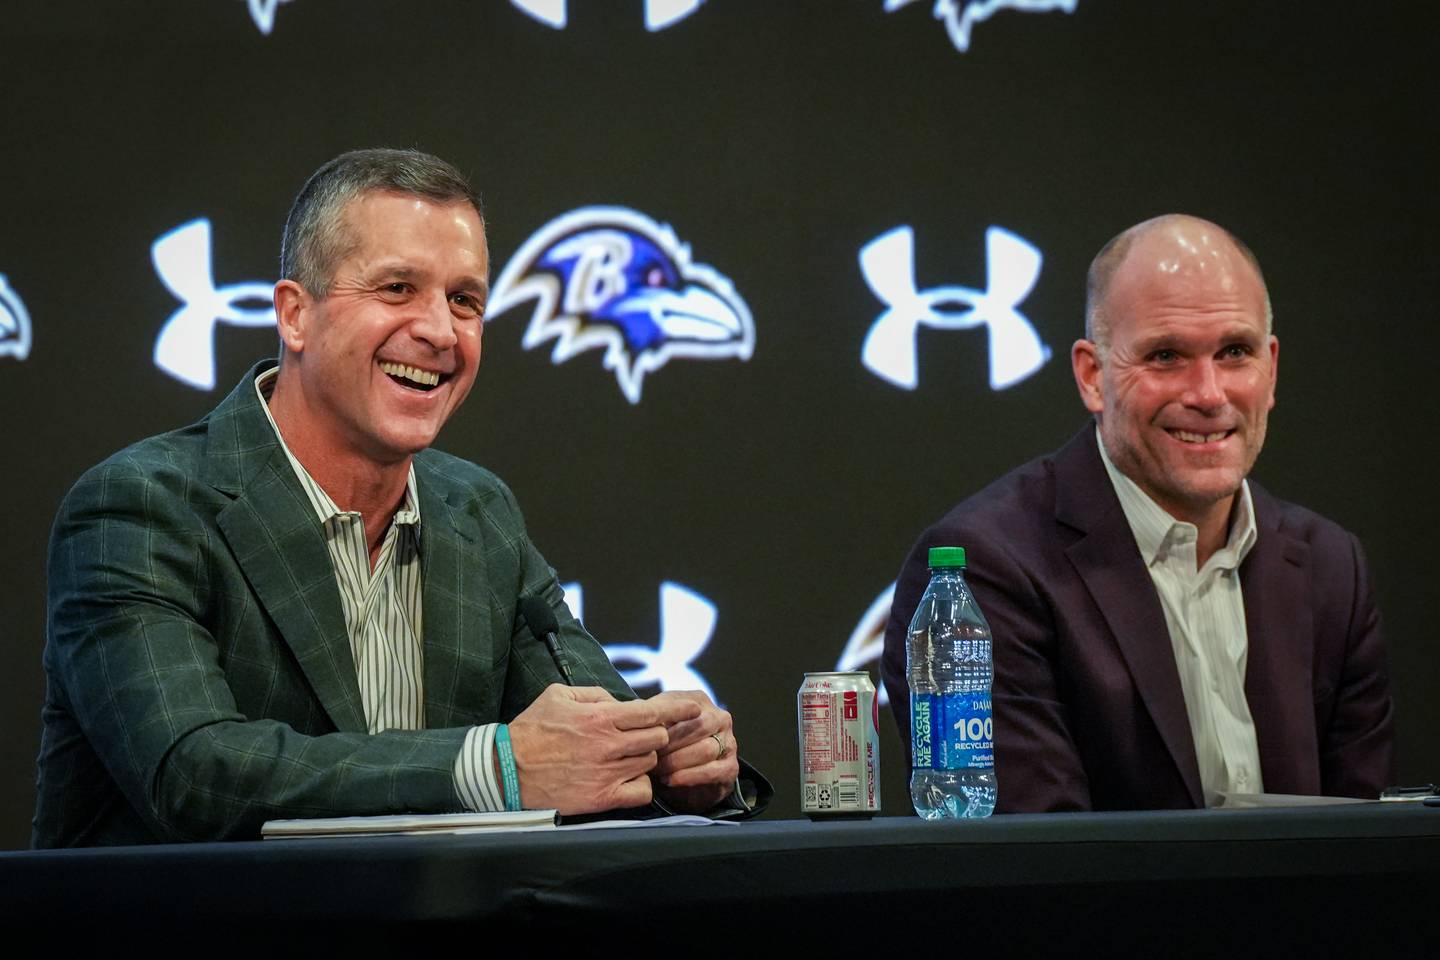 Baltimore Ravens Head Coach John Harbaugh, left, and General Manager Eric DeCosta hold a year-end press conference on 1/19/23 at the team’s training facility in Owings Mills.